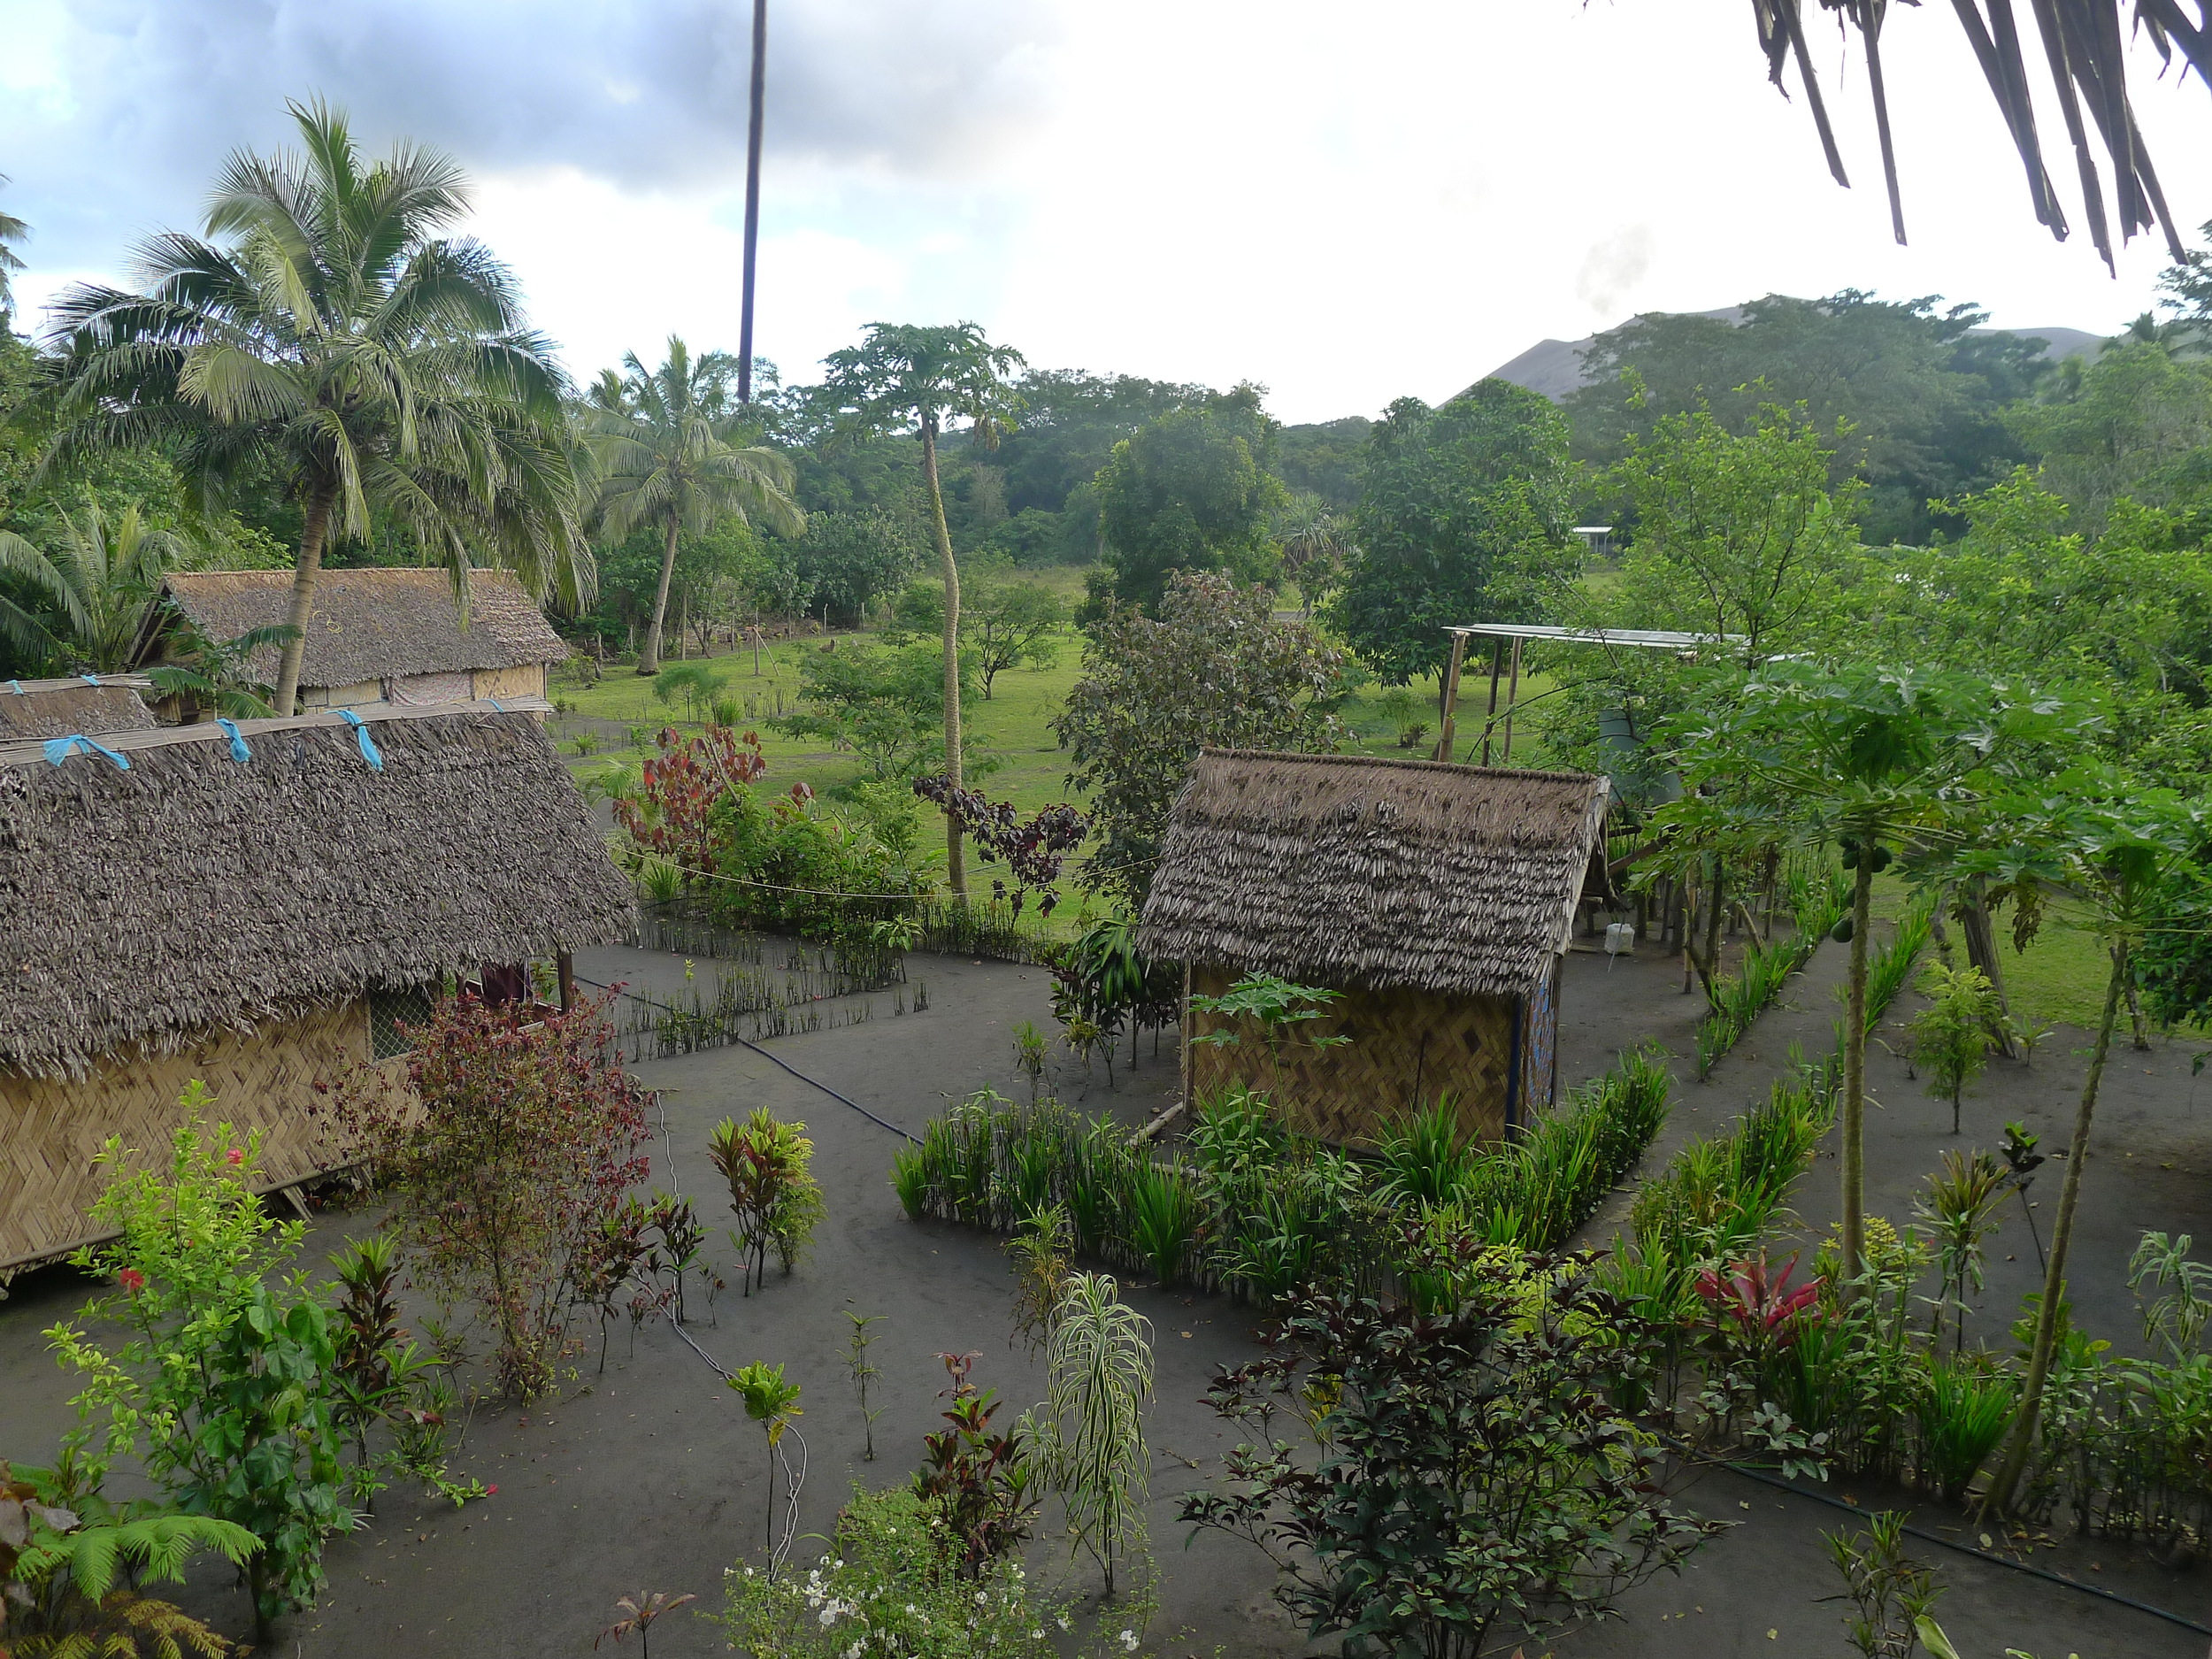  THE VIEW OF THE VILLAGE FROM OUR TREEHOUSE HUT.&nbsp; 